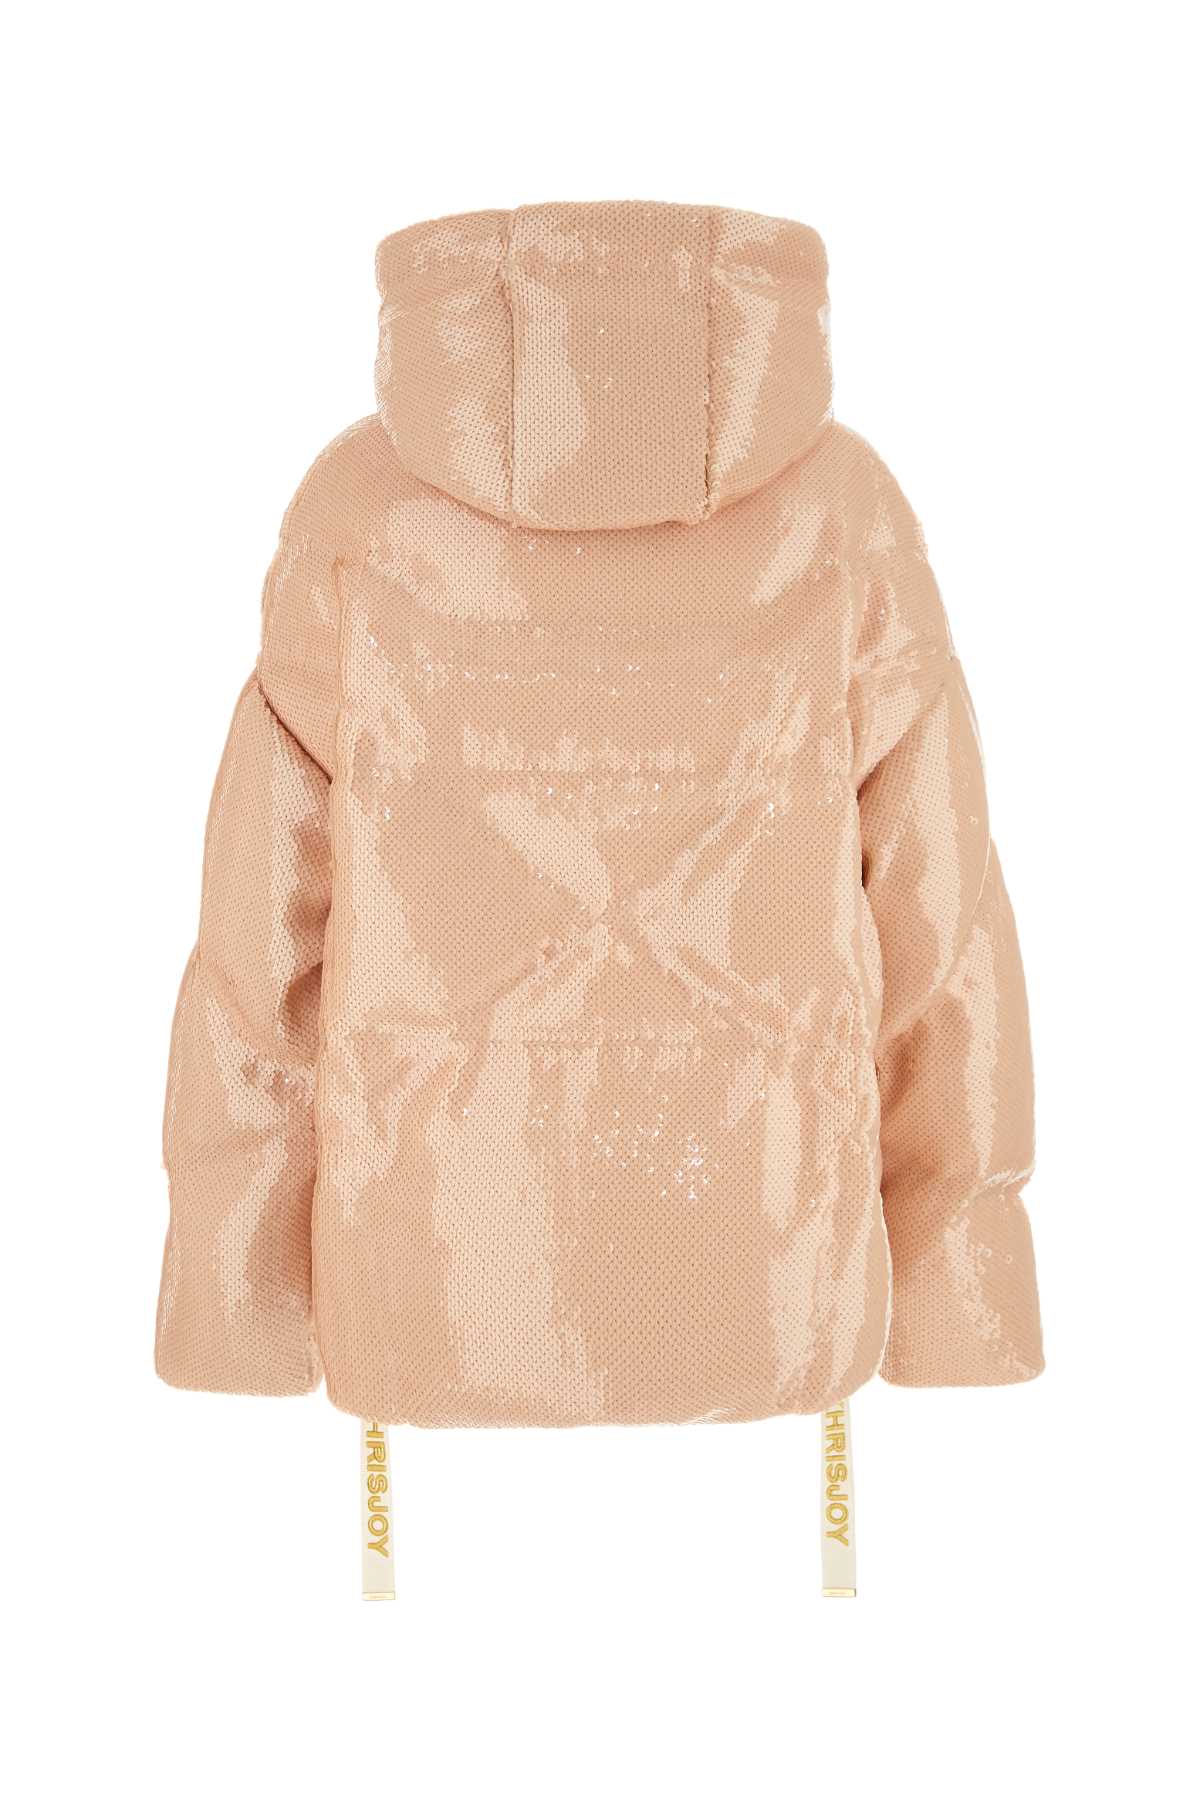 Khrisjoy Skin Pink Sequins Glossy Oversize Down Jacket In Nude